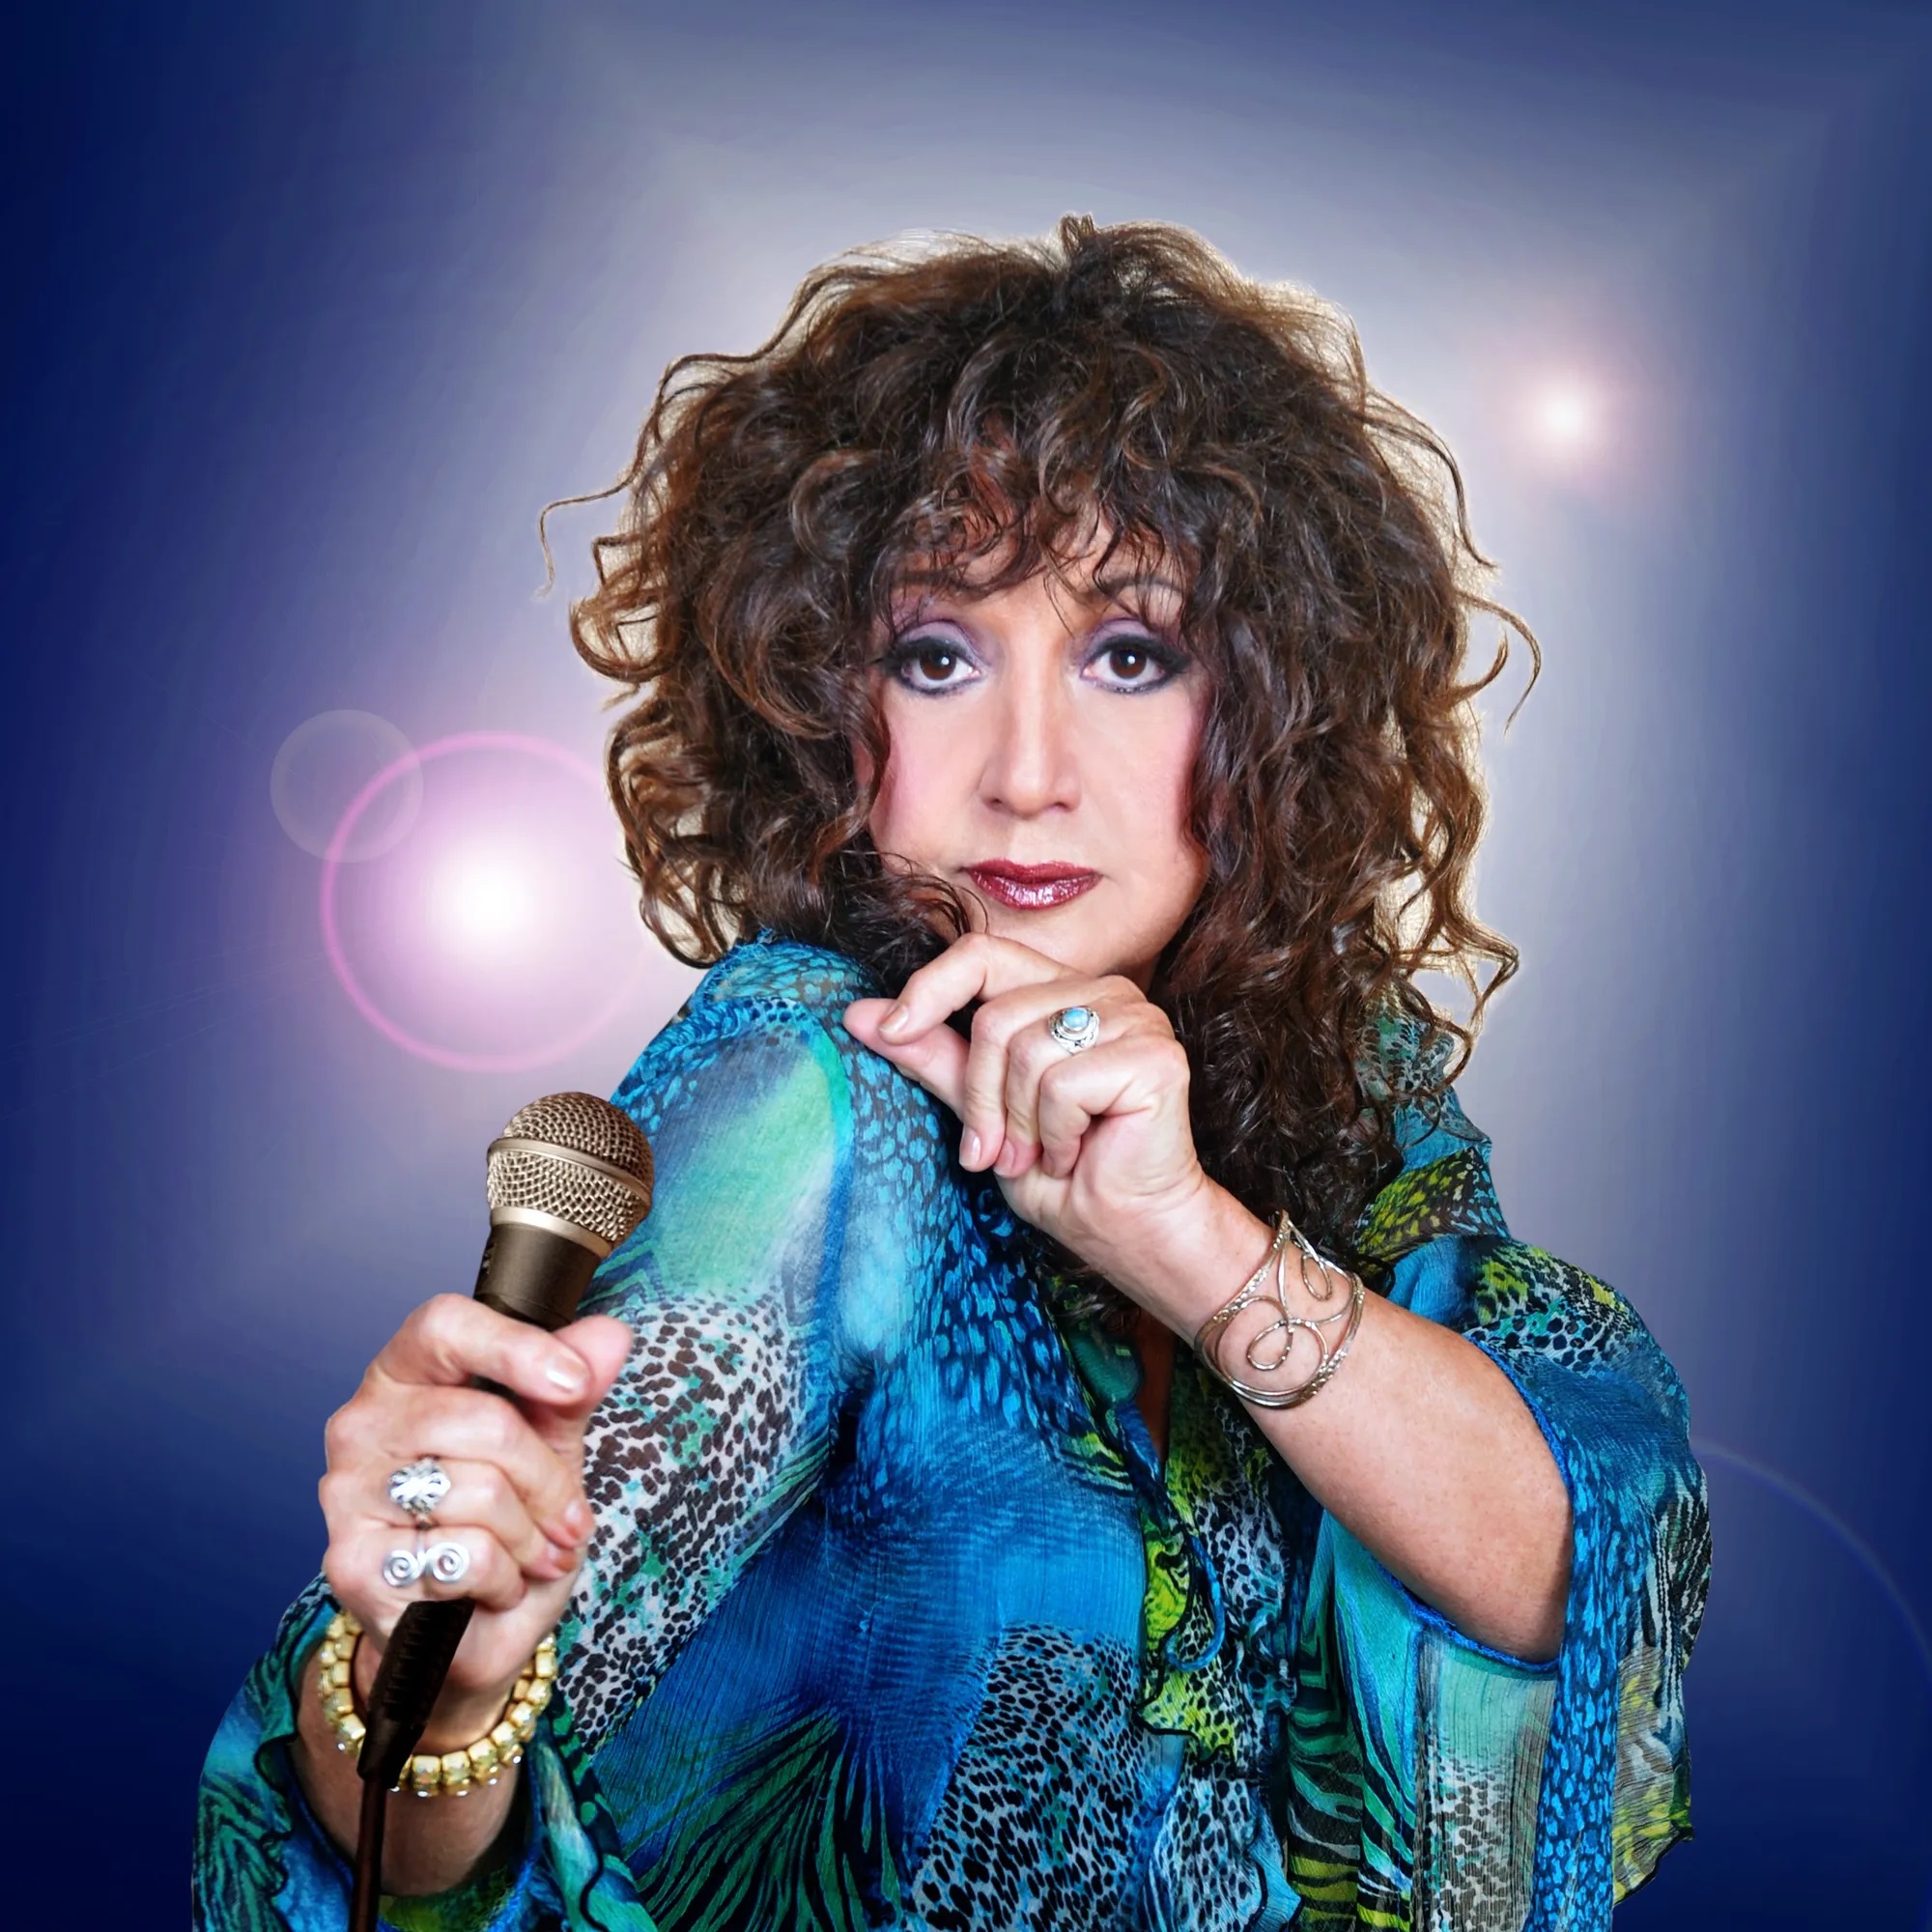 My Father’s Place Presents: MARIA MULDAUR “WAY PAST MIDNIGHT” with Acoustic Jack’s Waterfall